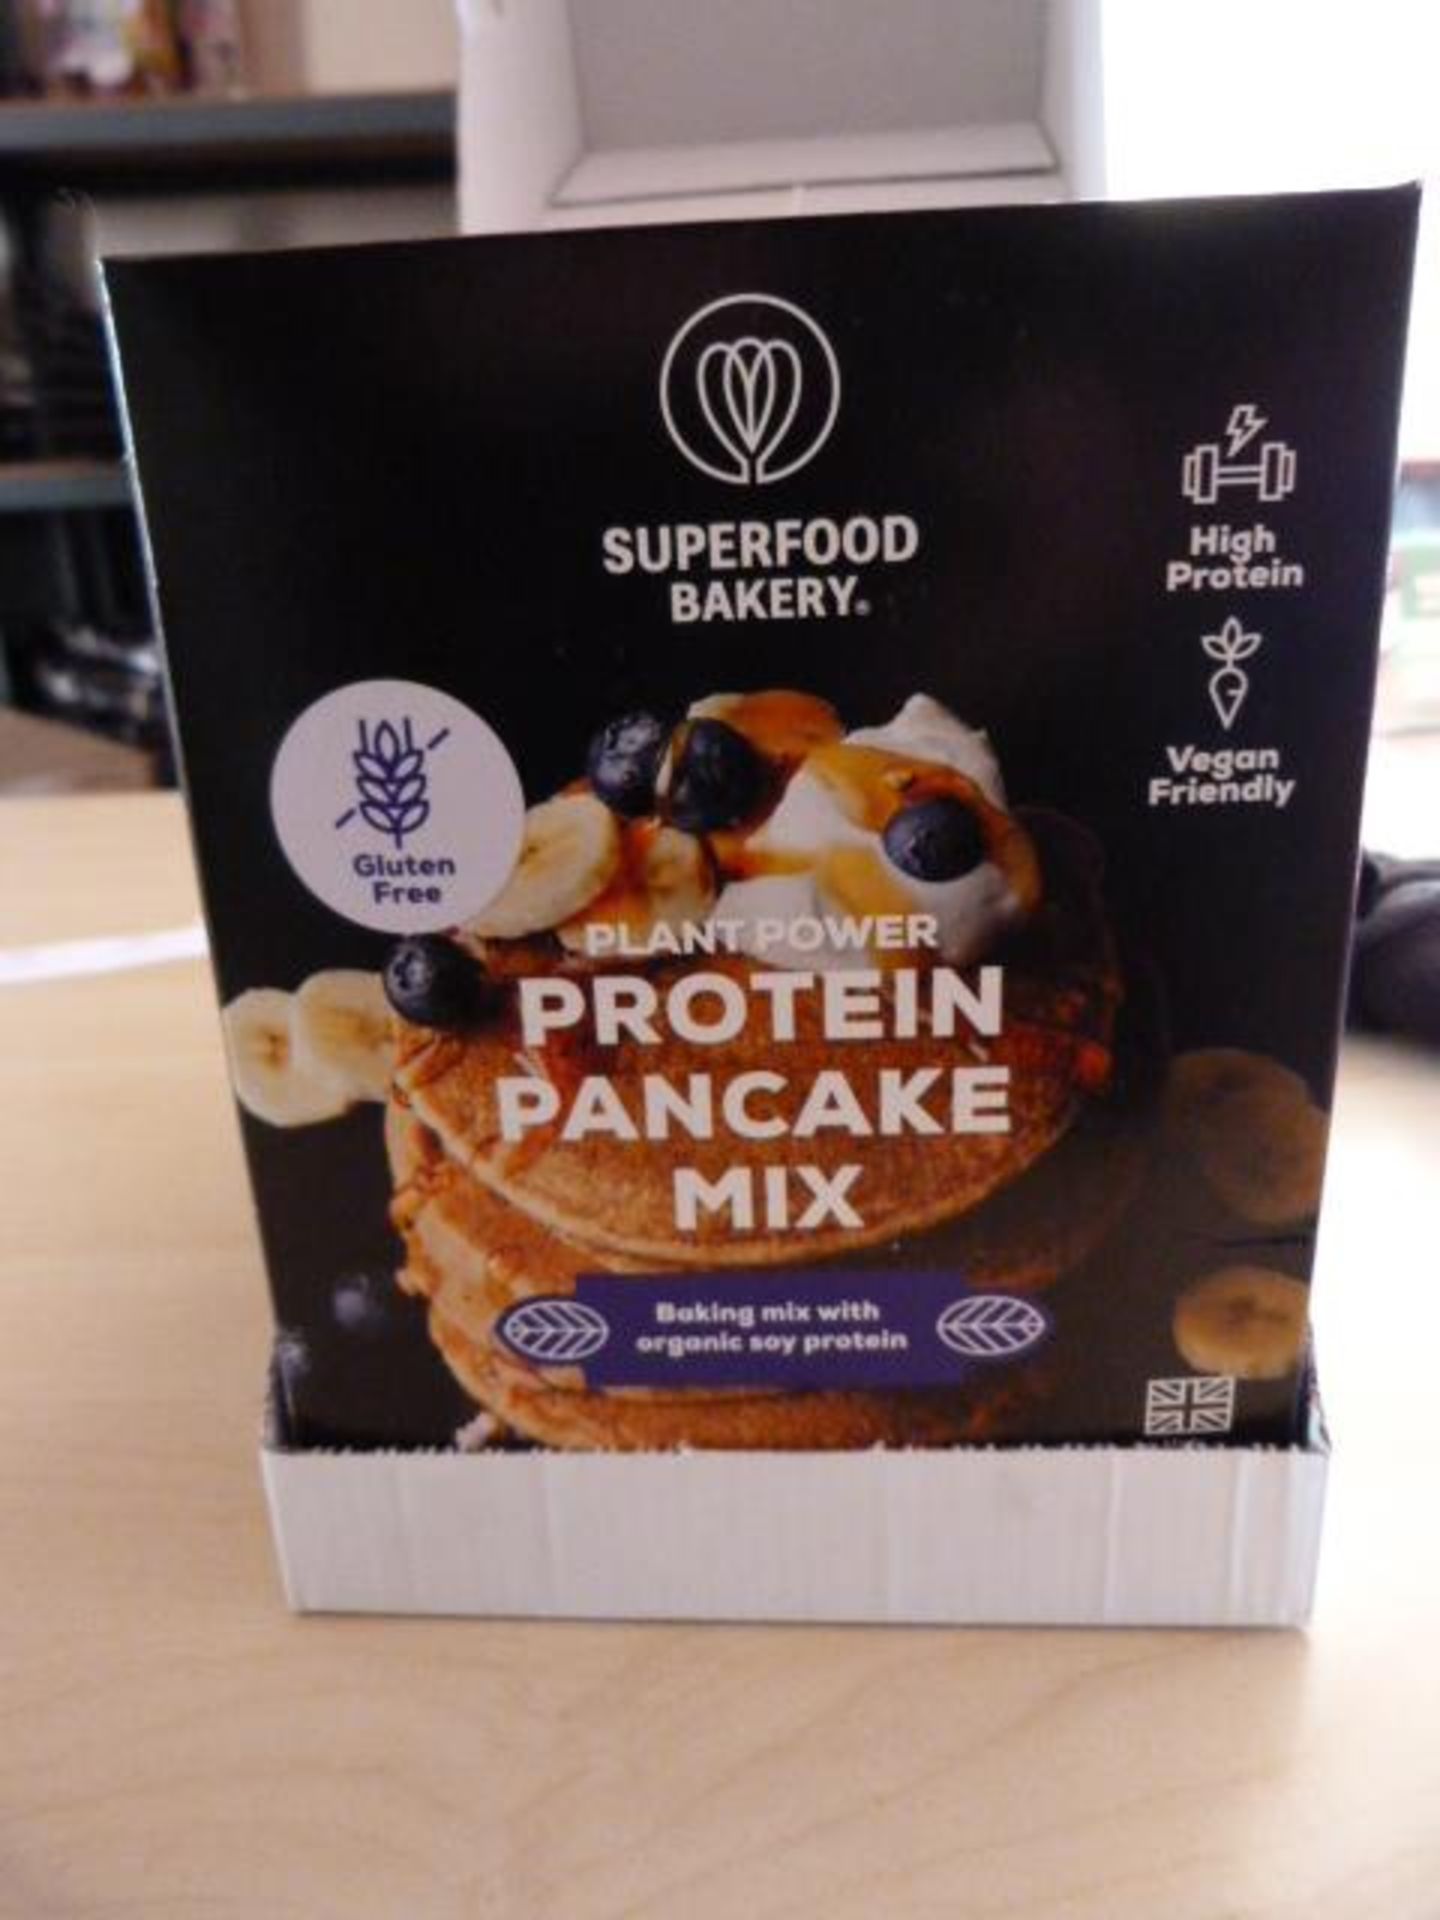 6x 200g Packs of Plant Power Protein pancake Mix